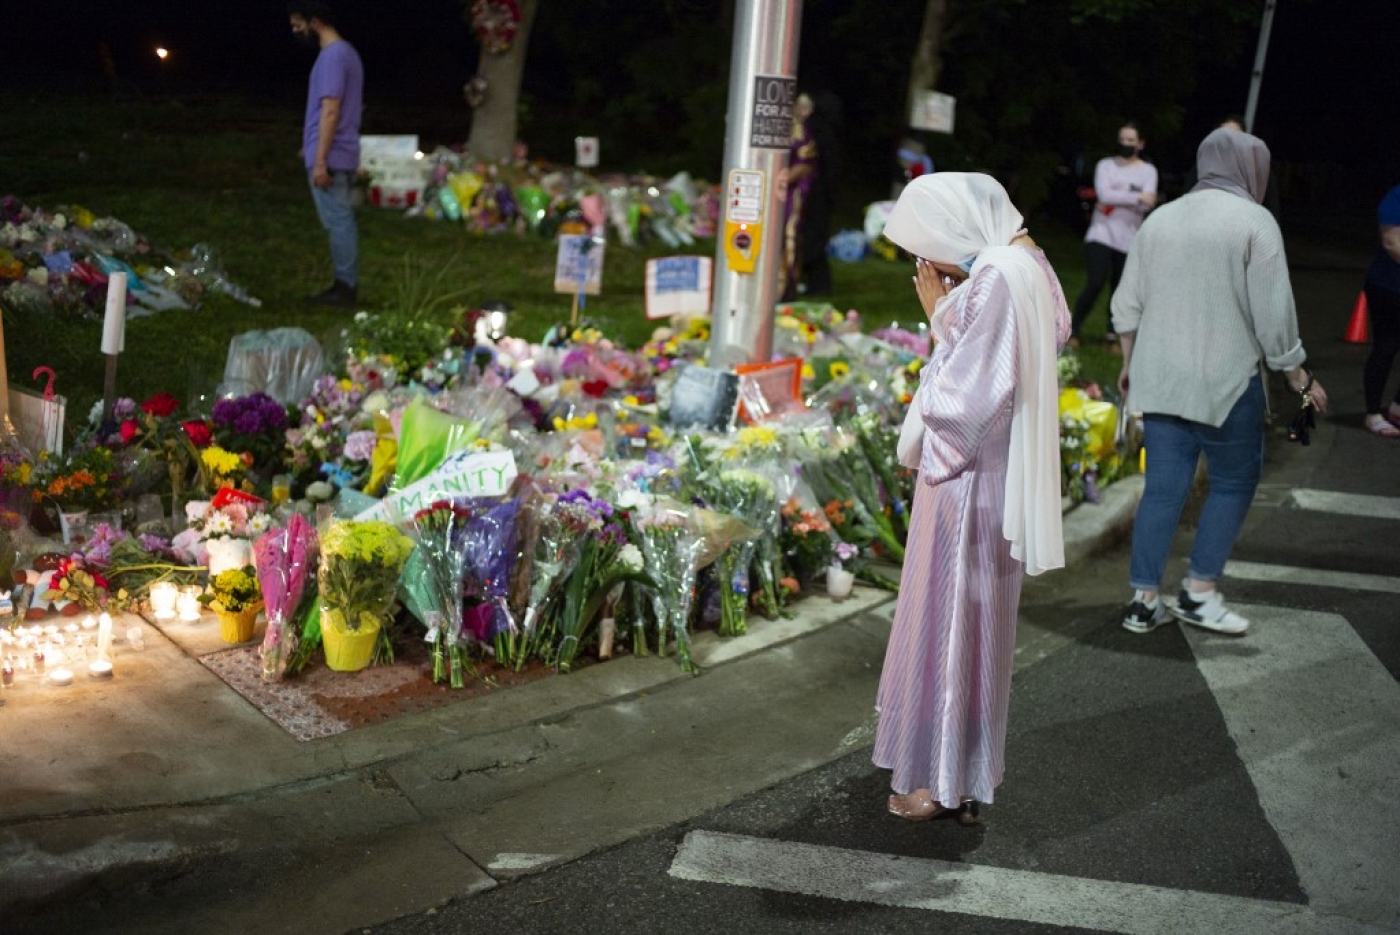 Members of the Muslim community and supporters light candles and place flowers at a memorial on 8 June in London, Canada.